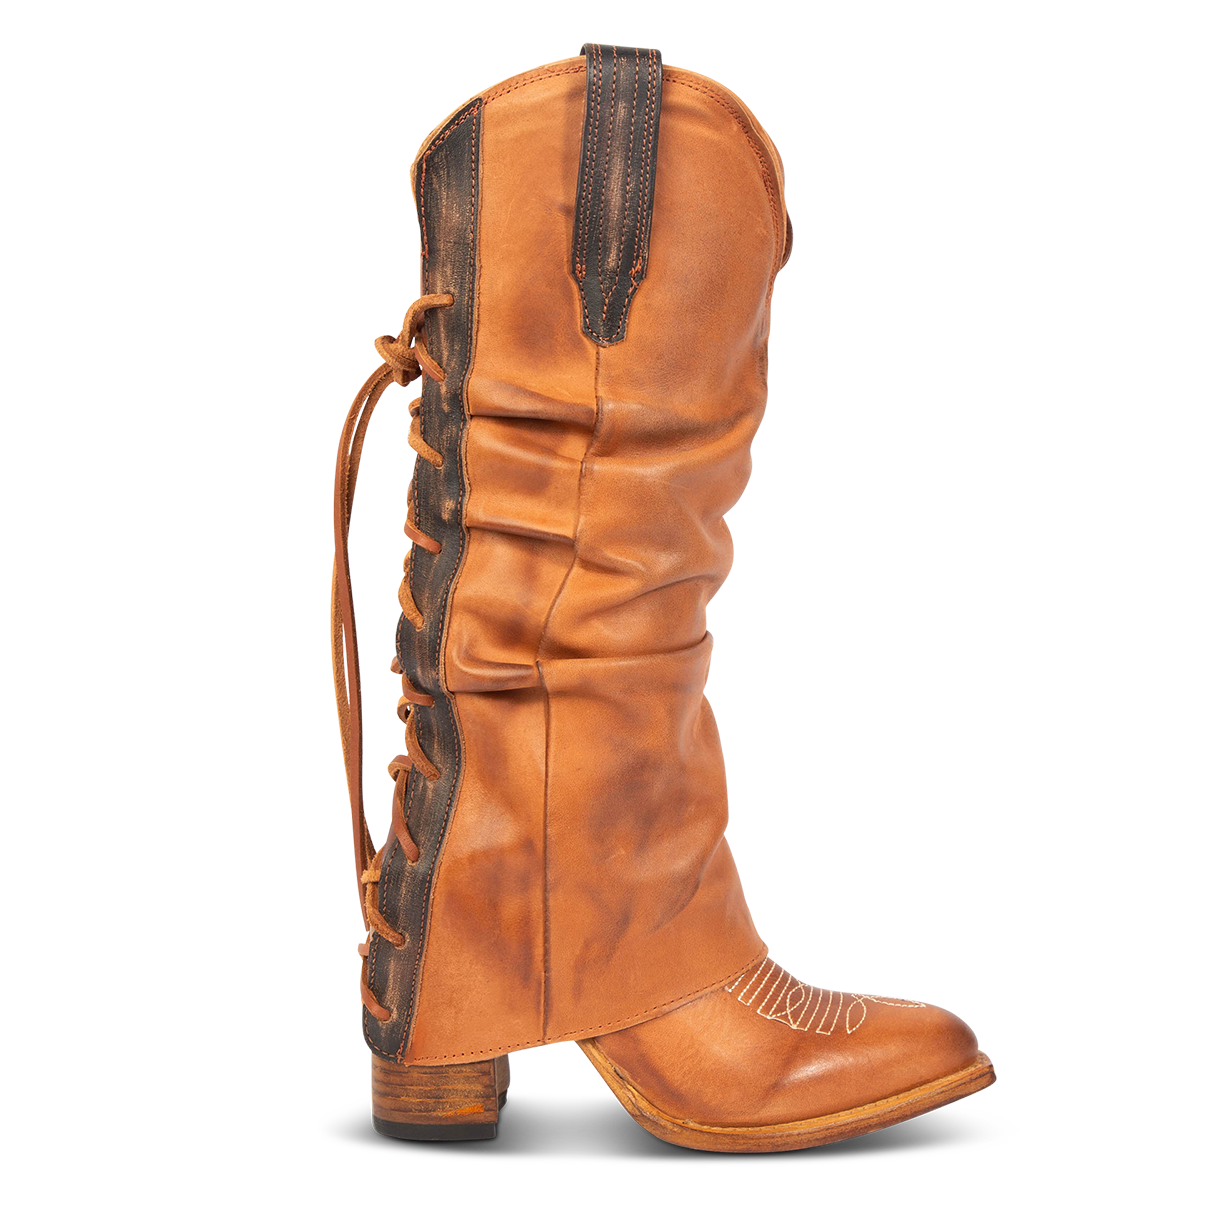 FREEBIRD women's Jules cognac leather high flare heel western boot with stitch detailing and back lacing